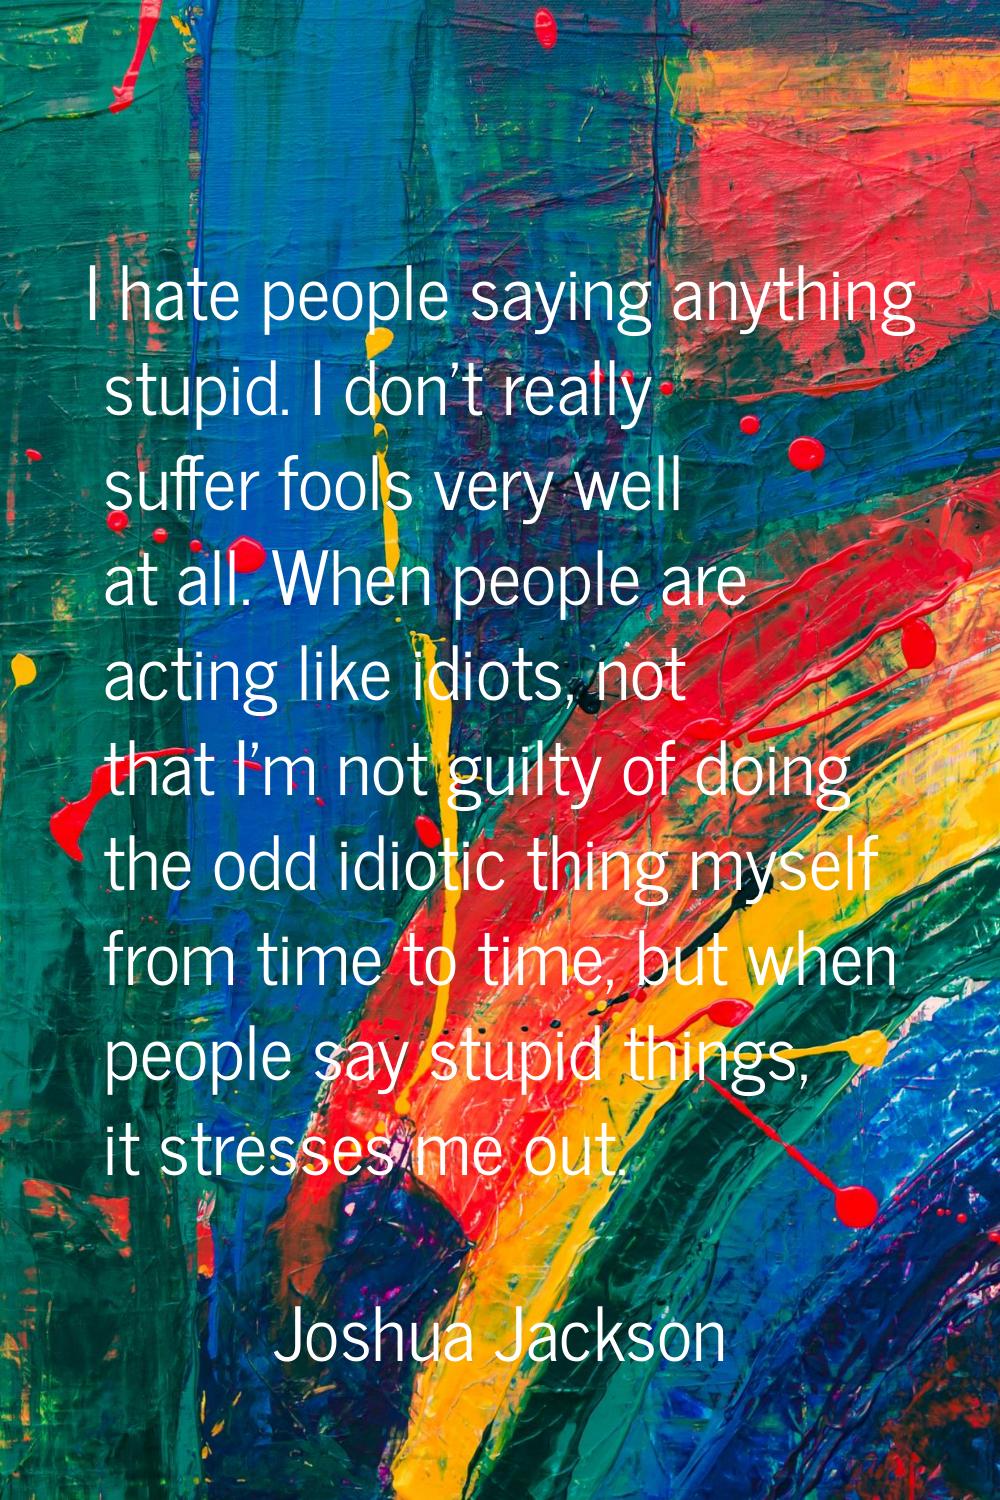 I hate people saying anything stupid. I don't really suffer fools very well at all. When people are